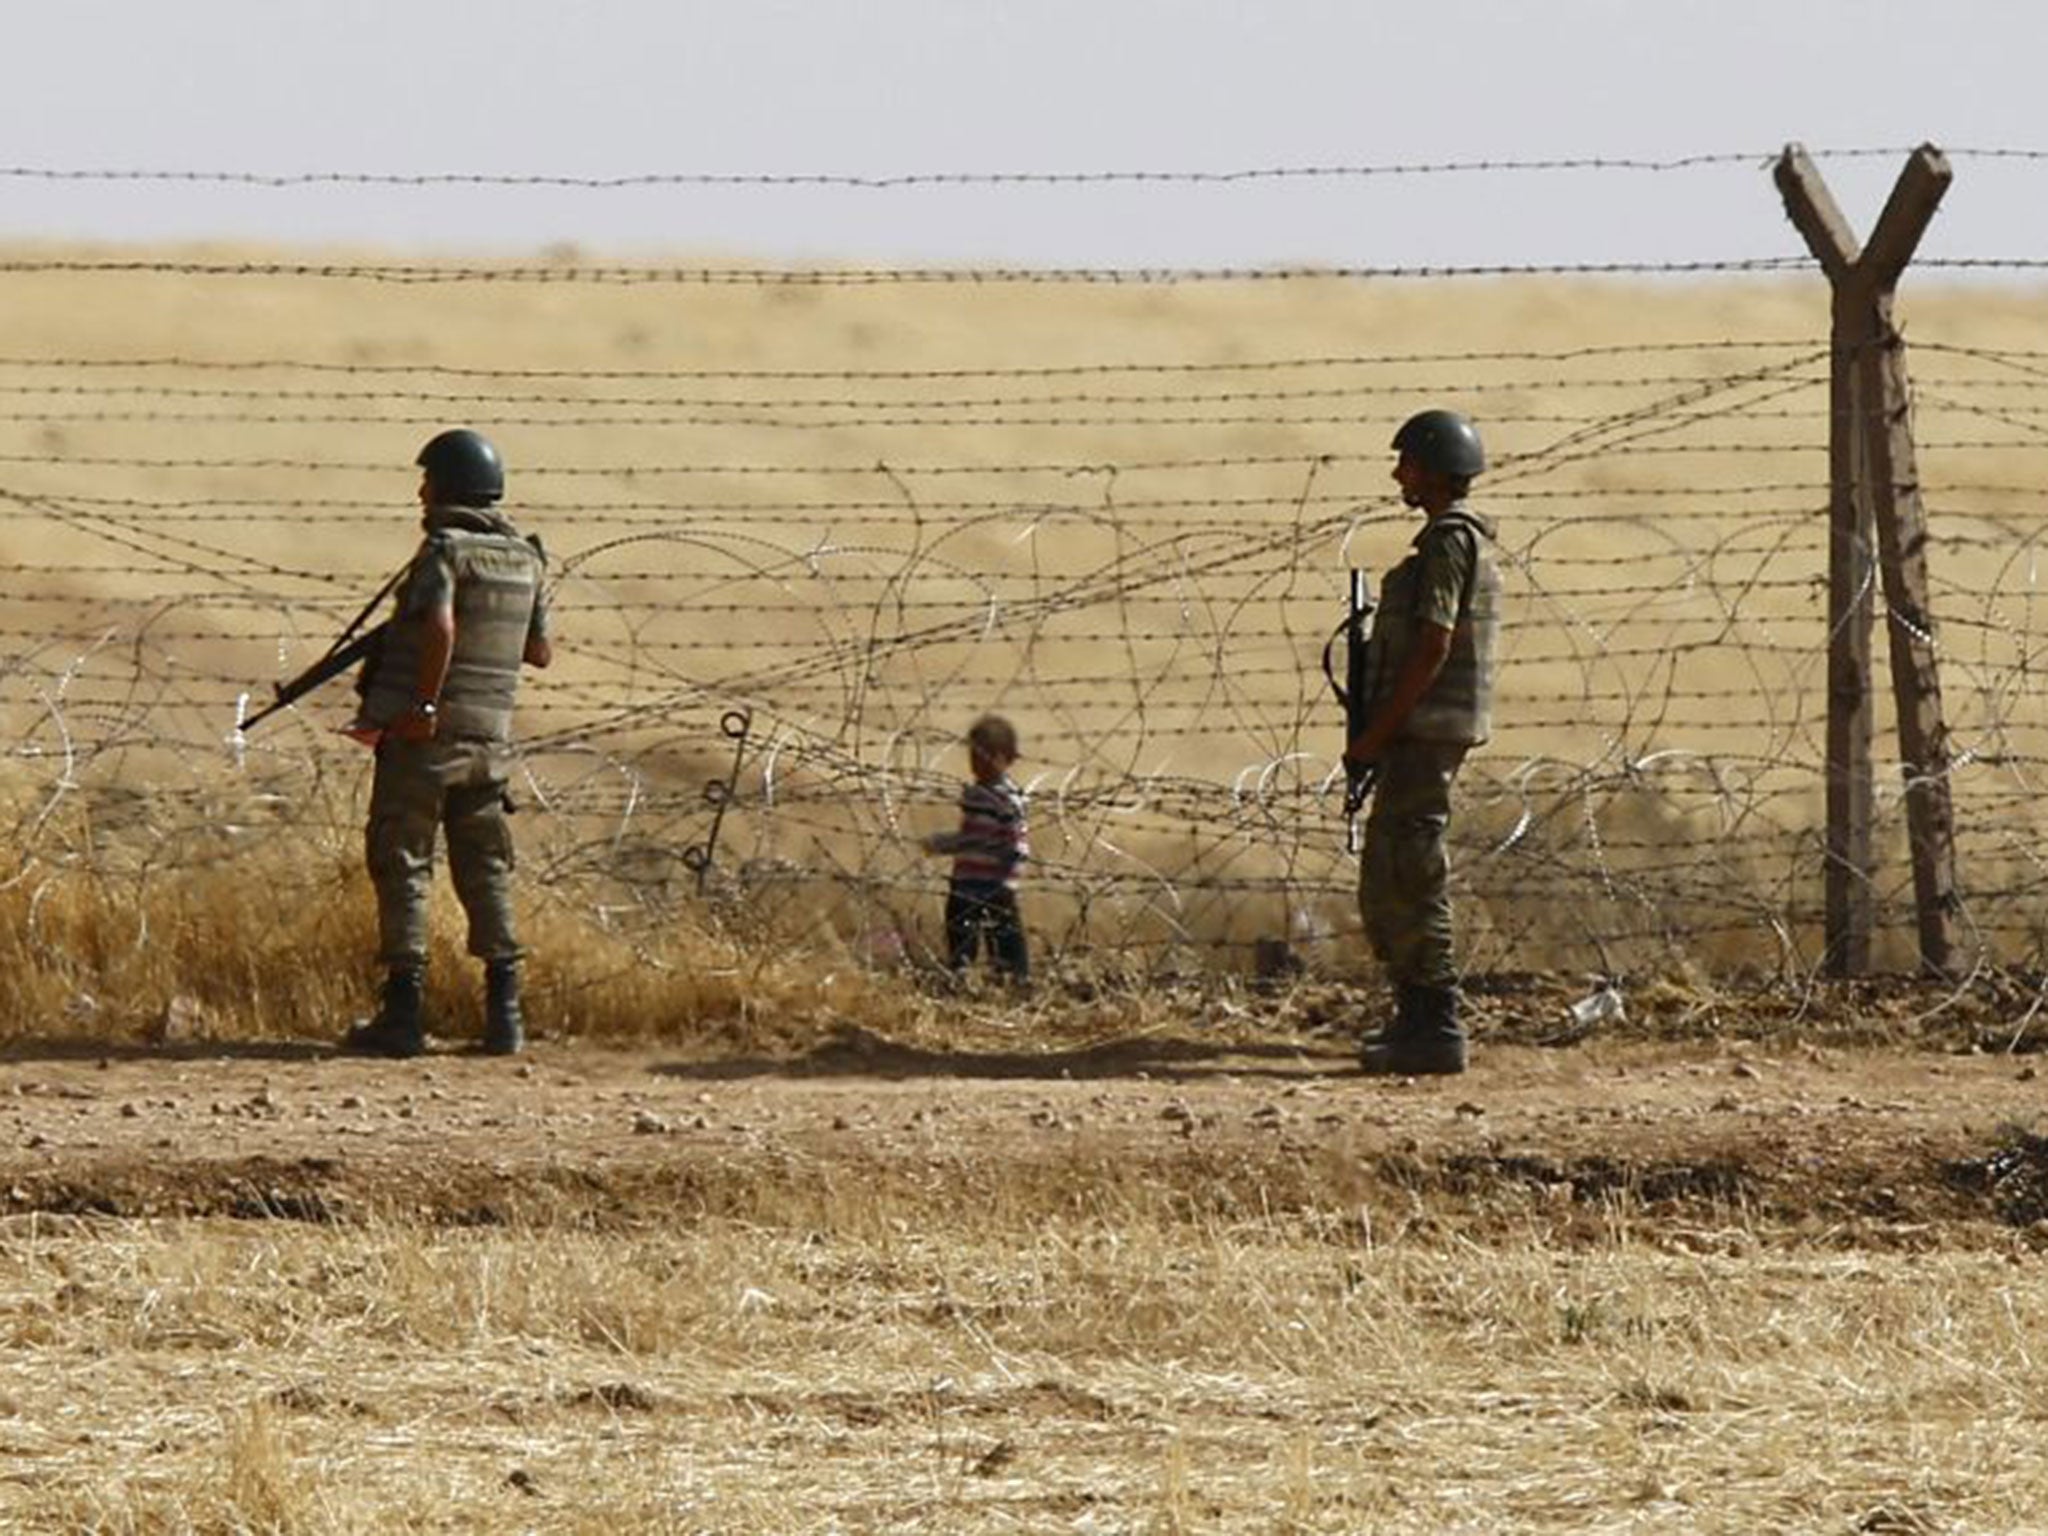 Turkish soldiers stand guard on the border with Syria, near the southeastern town of Akcakale. Turkey is the largest host country, having taken in over 2.7 million Syrian refugees